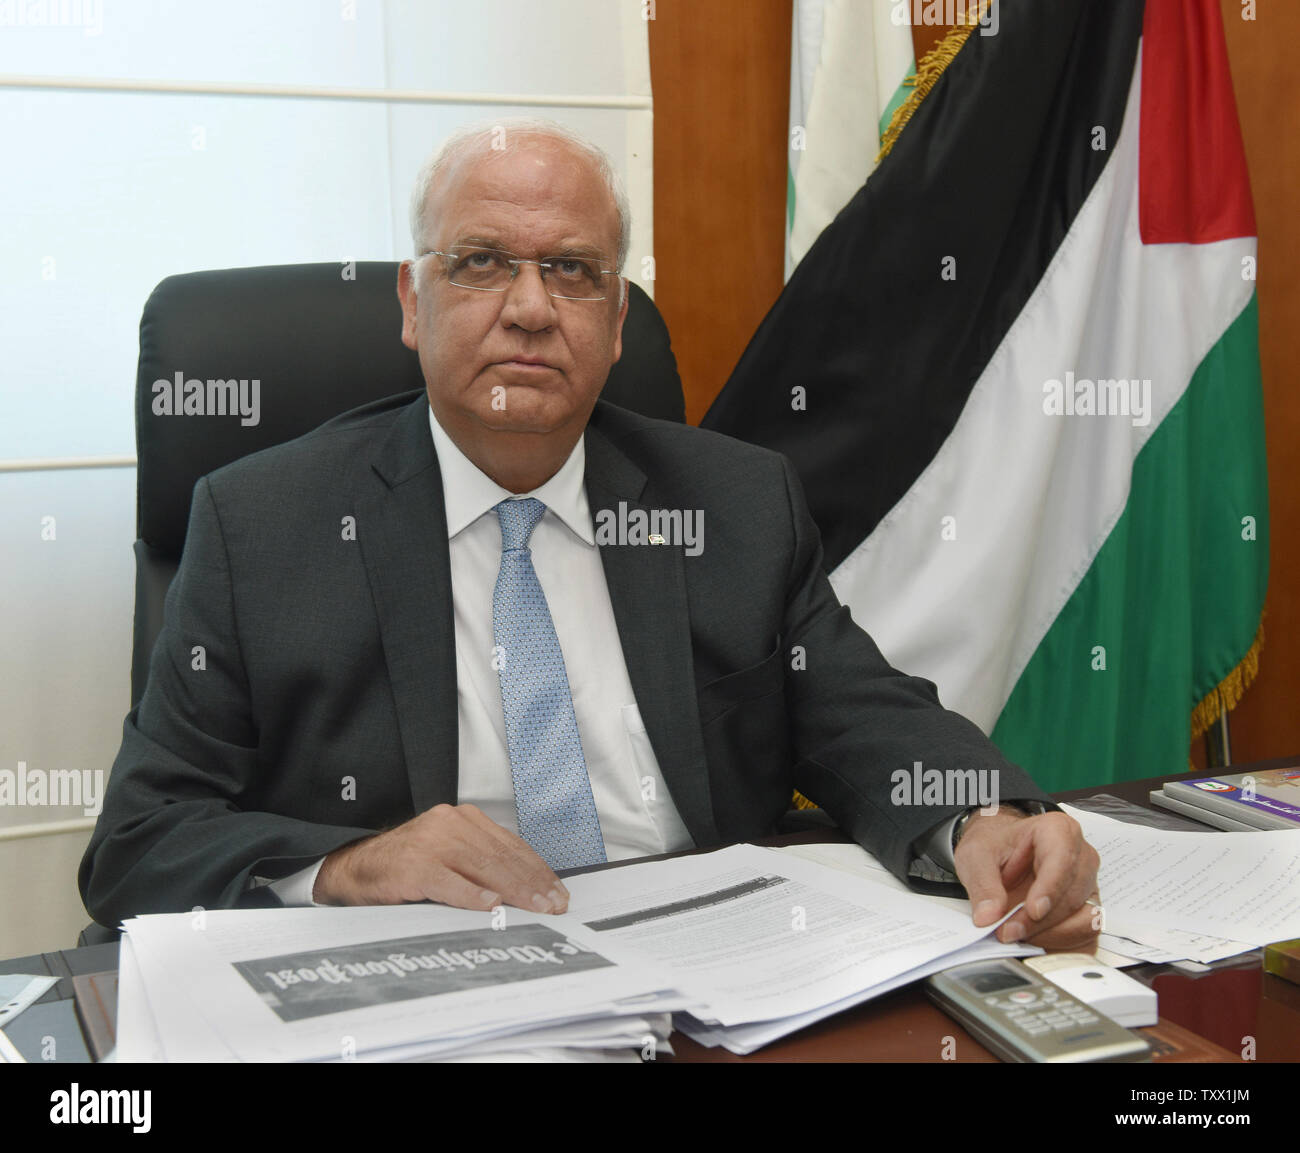 Dr. Saeb Erekat, General Secretariat of  the PLO, Palestinian Liberation Organization, works in his office in the PLO headquarters in Ramallah, West Bank, September 17, 2018. According to a PLO statement, U.S. authorities told employees of the PLO office in Washington, D.C. to cease operations, close all bank accounts and vacate the premises by Oct. 13. The visas of the Palestinian Ambassador Husam Zomlot and his family were revoked by American authorities who demanded they  leave the country.   Photo by Debbie Hill/UPI Stock Photo